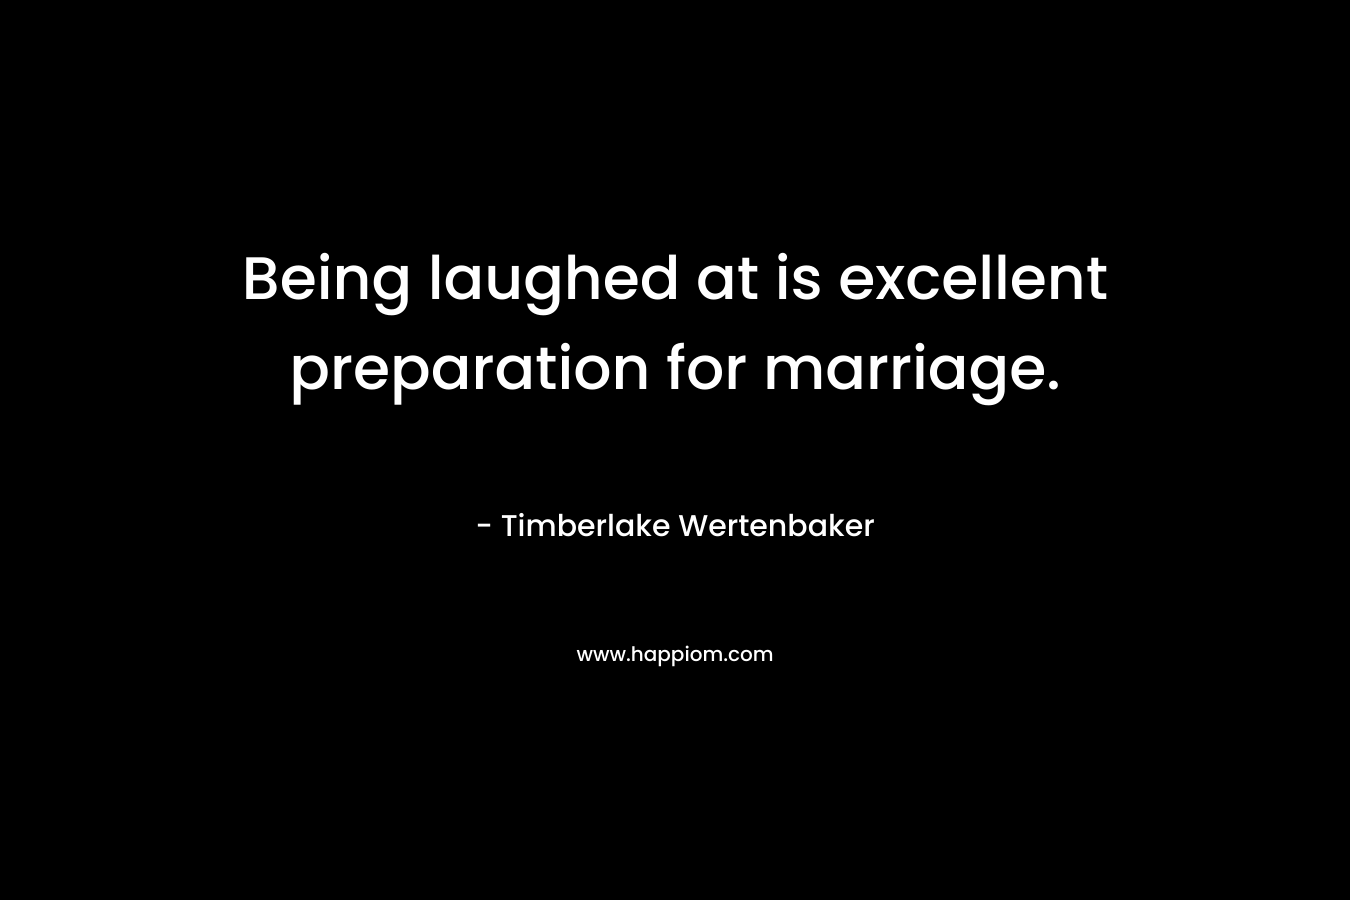 Being laughed at is excellent preparation for marriage.